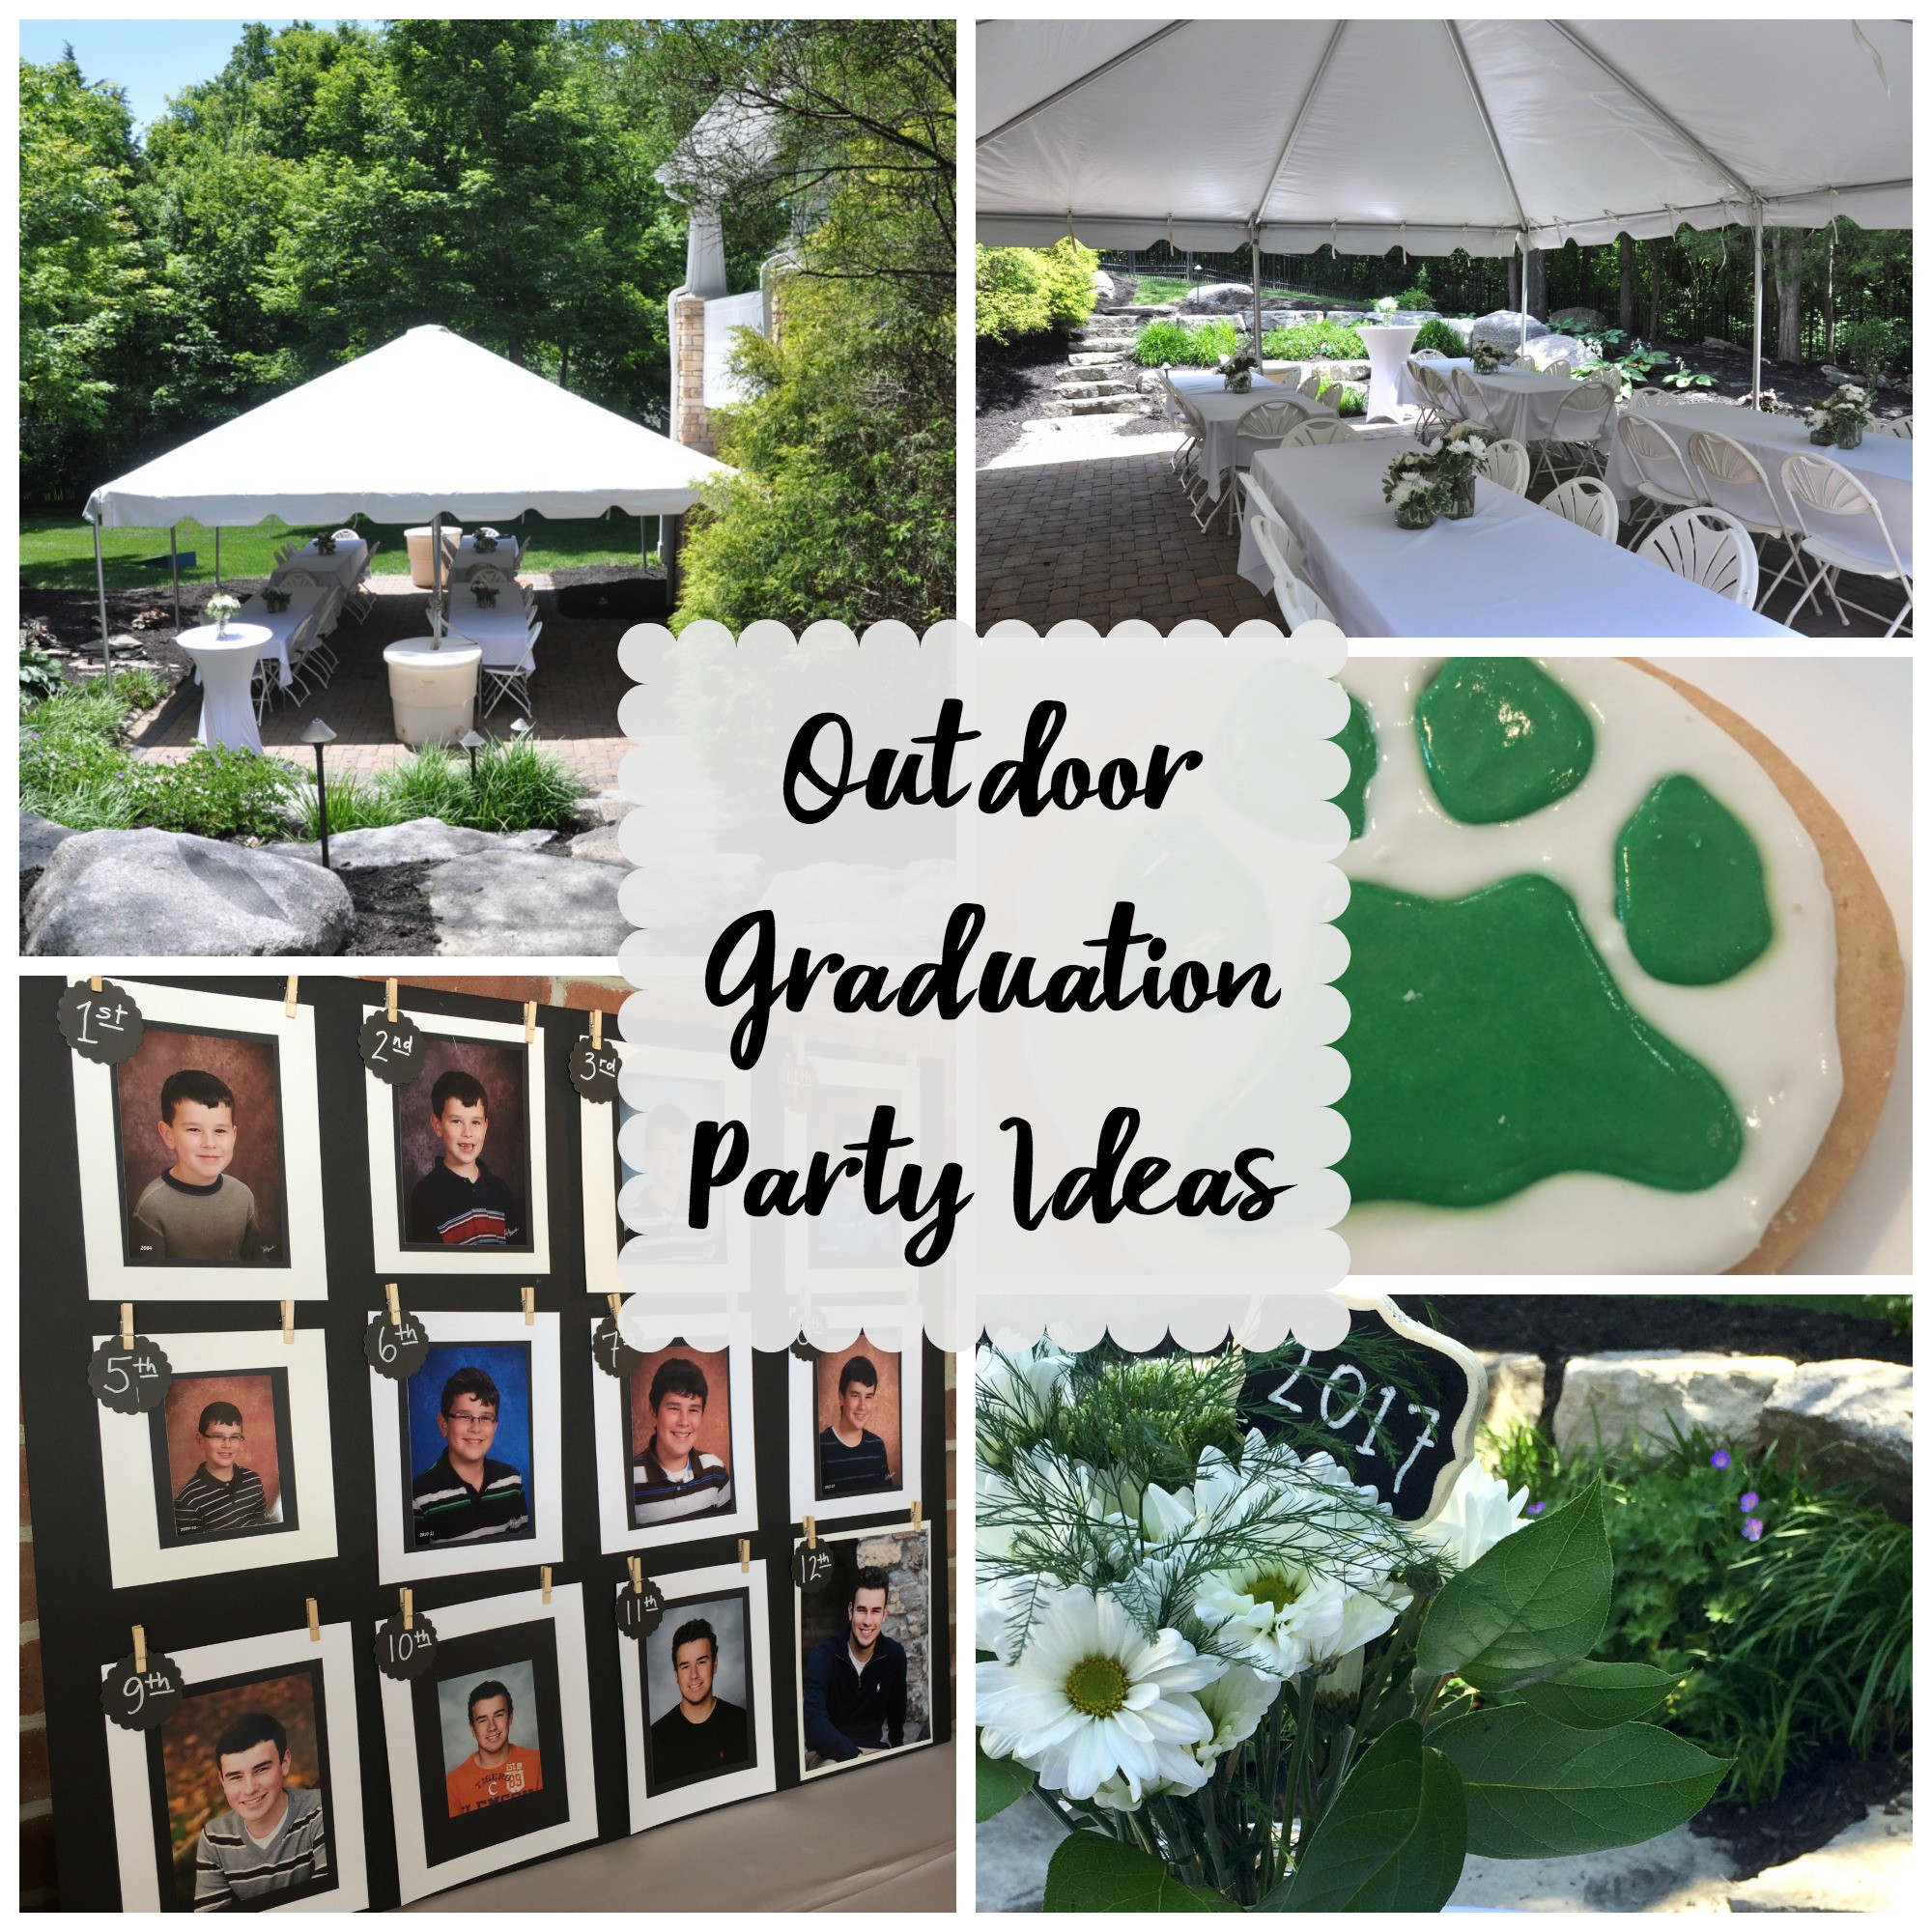 Ideas For High School Graduation Party
 Outdoor Graduation Party Evolution of Style